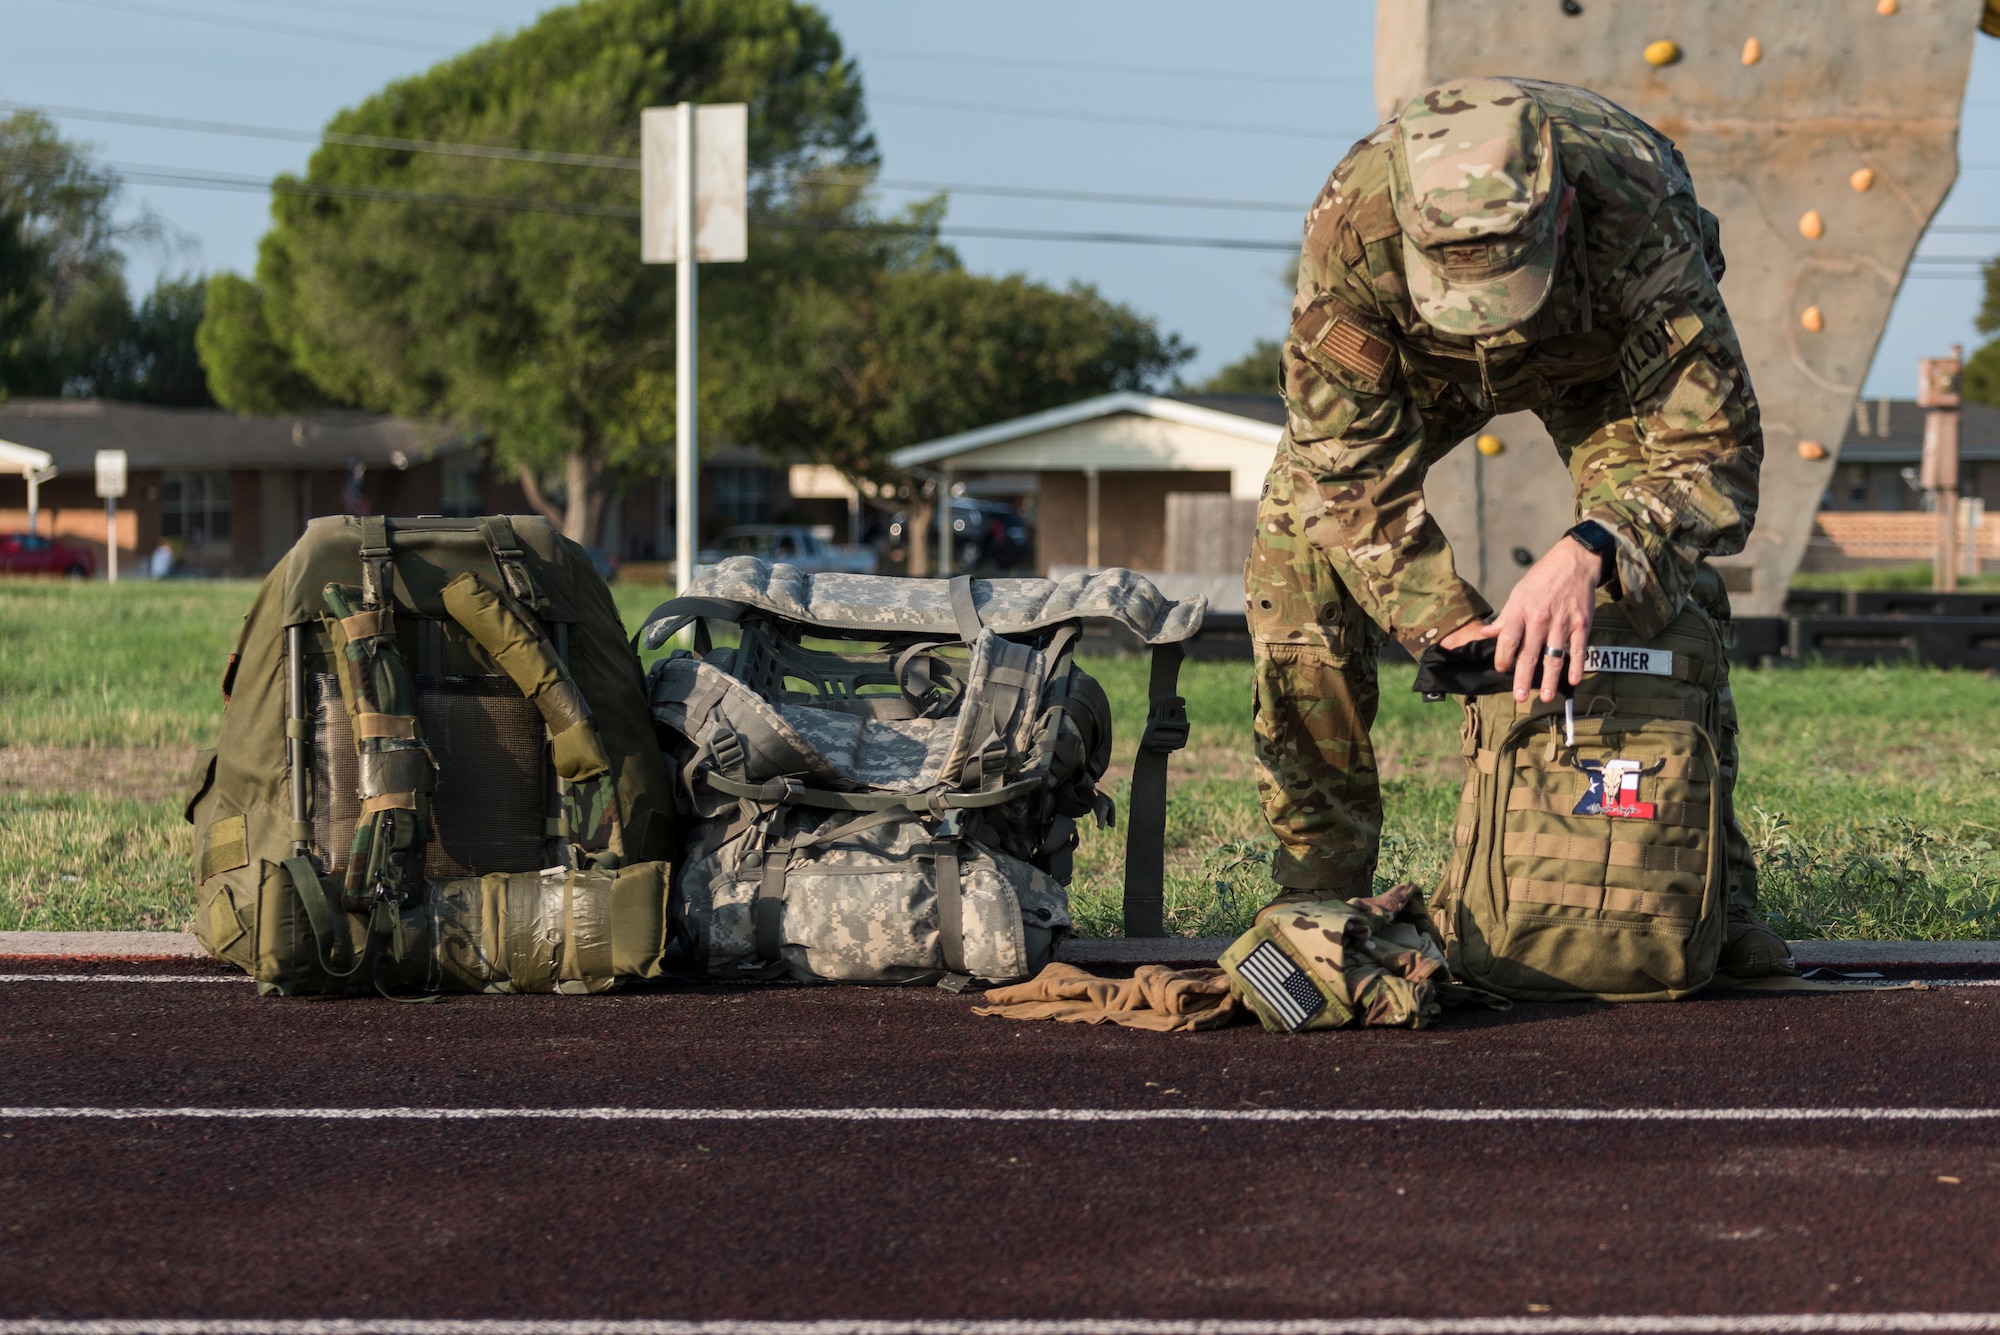 Col. Craig Prather, 47th Flying Training Wing commander, prepares his gear for the ruck competition around the base perimeter in celebration of the Air Force’s 73rd birthday on Sept. 18, 2020, at Laughlin Air Force Base, Texas. “Today is more than just the United States Air Force’s 73rd birthday,” said Chief Master JoAnne S. Bass, Chief Master Sergeant of the Air Force, in a shared Facebook post. “Today is an opportunity to reflect on where we came from, how we got here and where we are going.” (U.S. Air Force photo by Senior Airman Anne McCready)